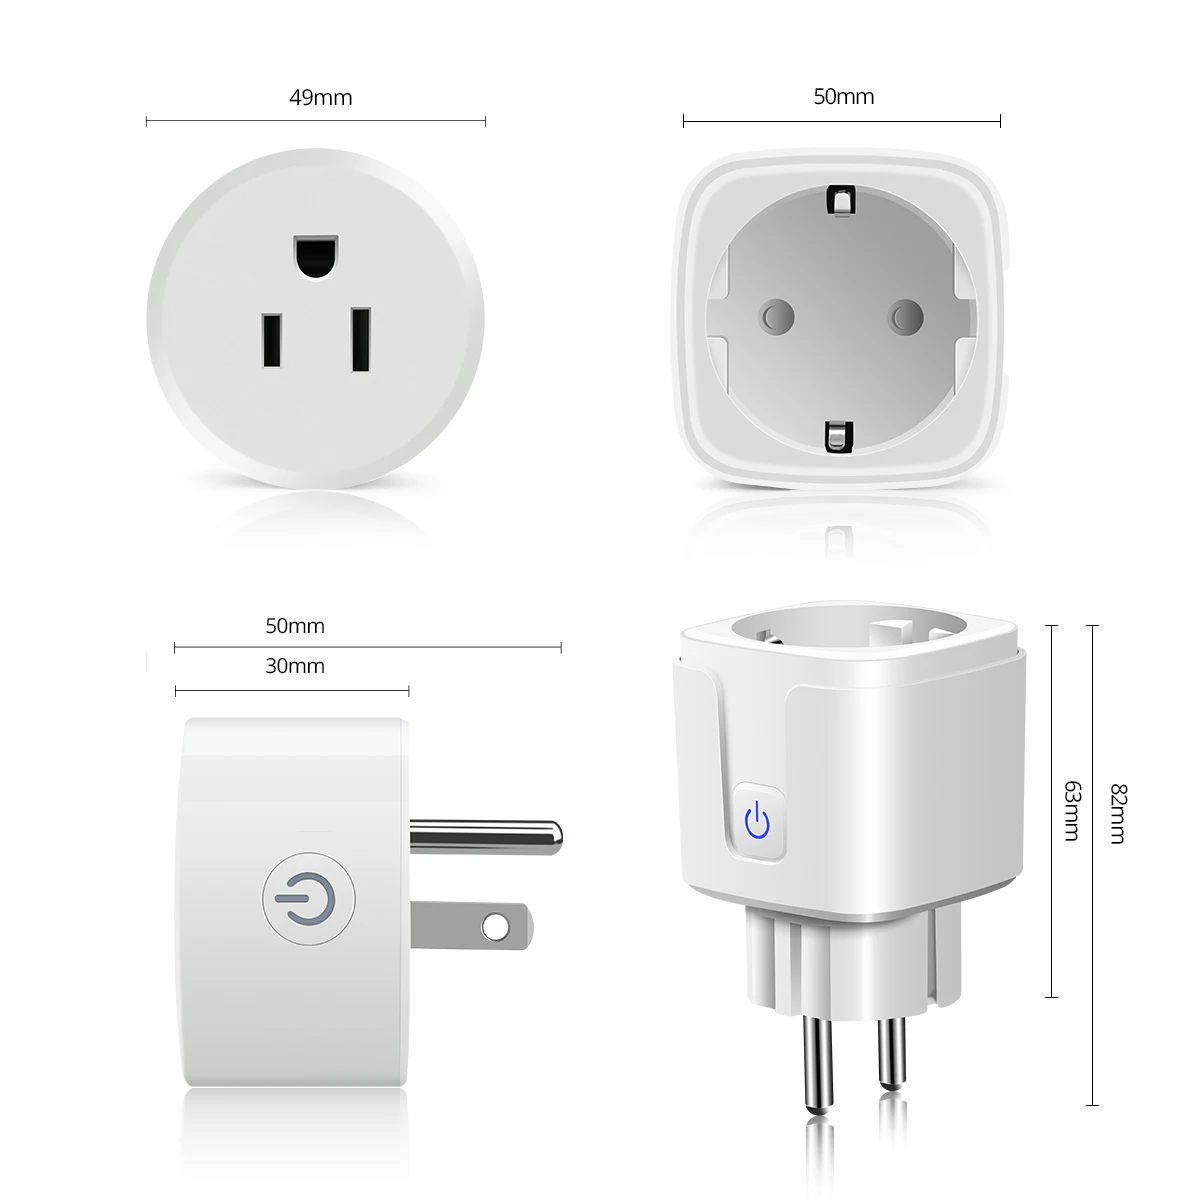 https://ae01.alicdn.com/kf/S79251652120144e29b92970c6c5136c8S/Tuya-Smart-Socket-WiFi-Electrical-Outlets-Plug-15A-Remote-Smart-life-Alexa-Voice-Control-Wall-Light.jpg